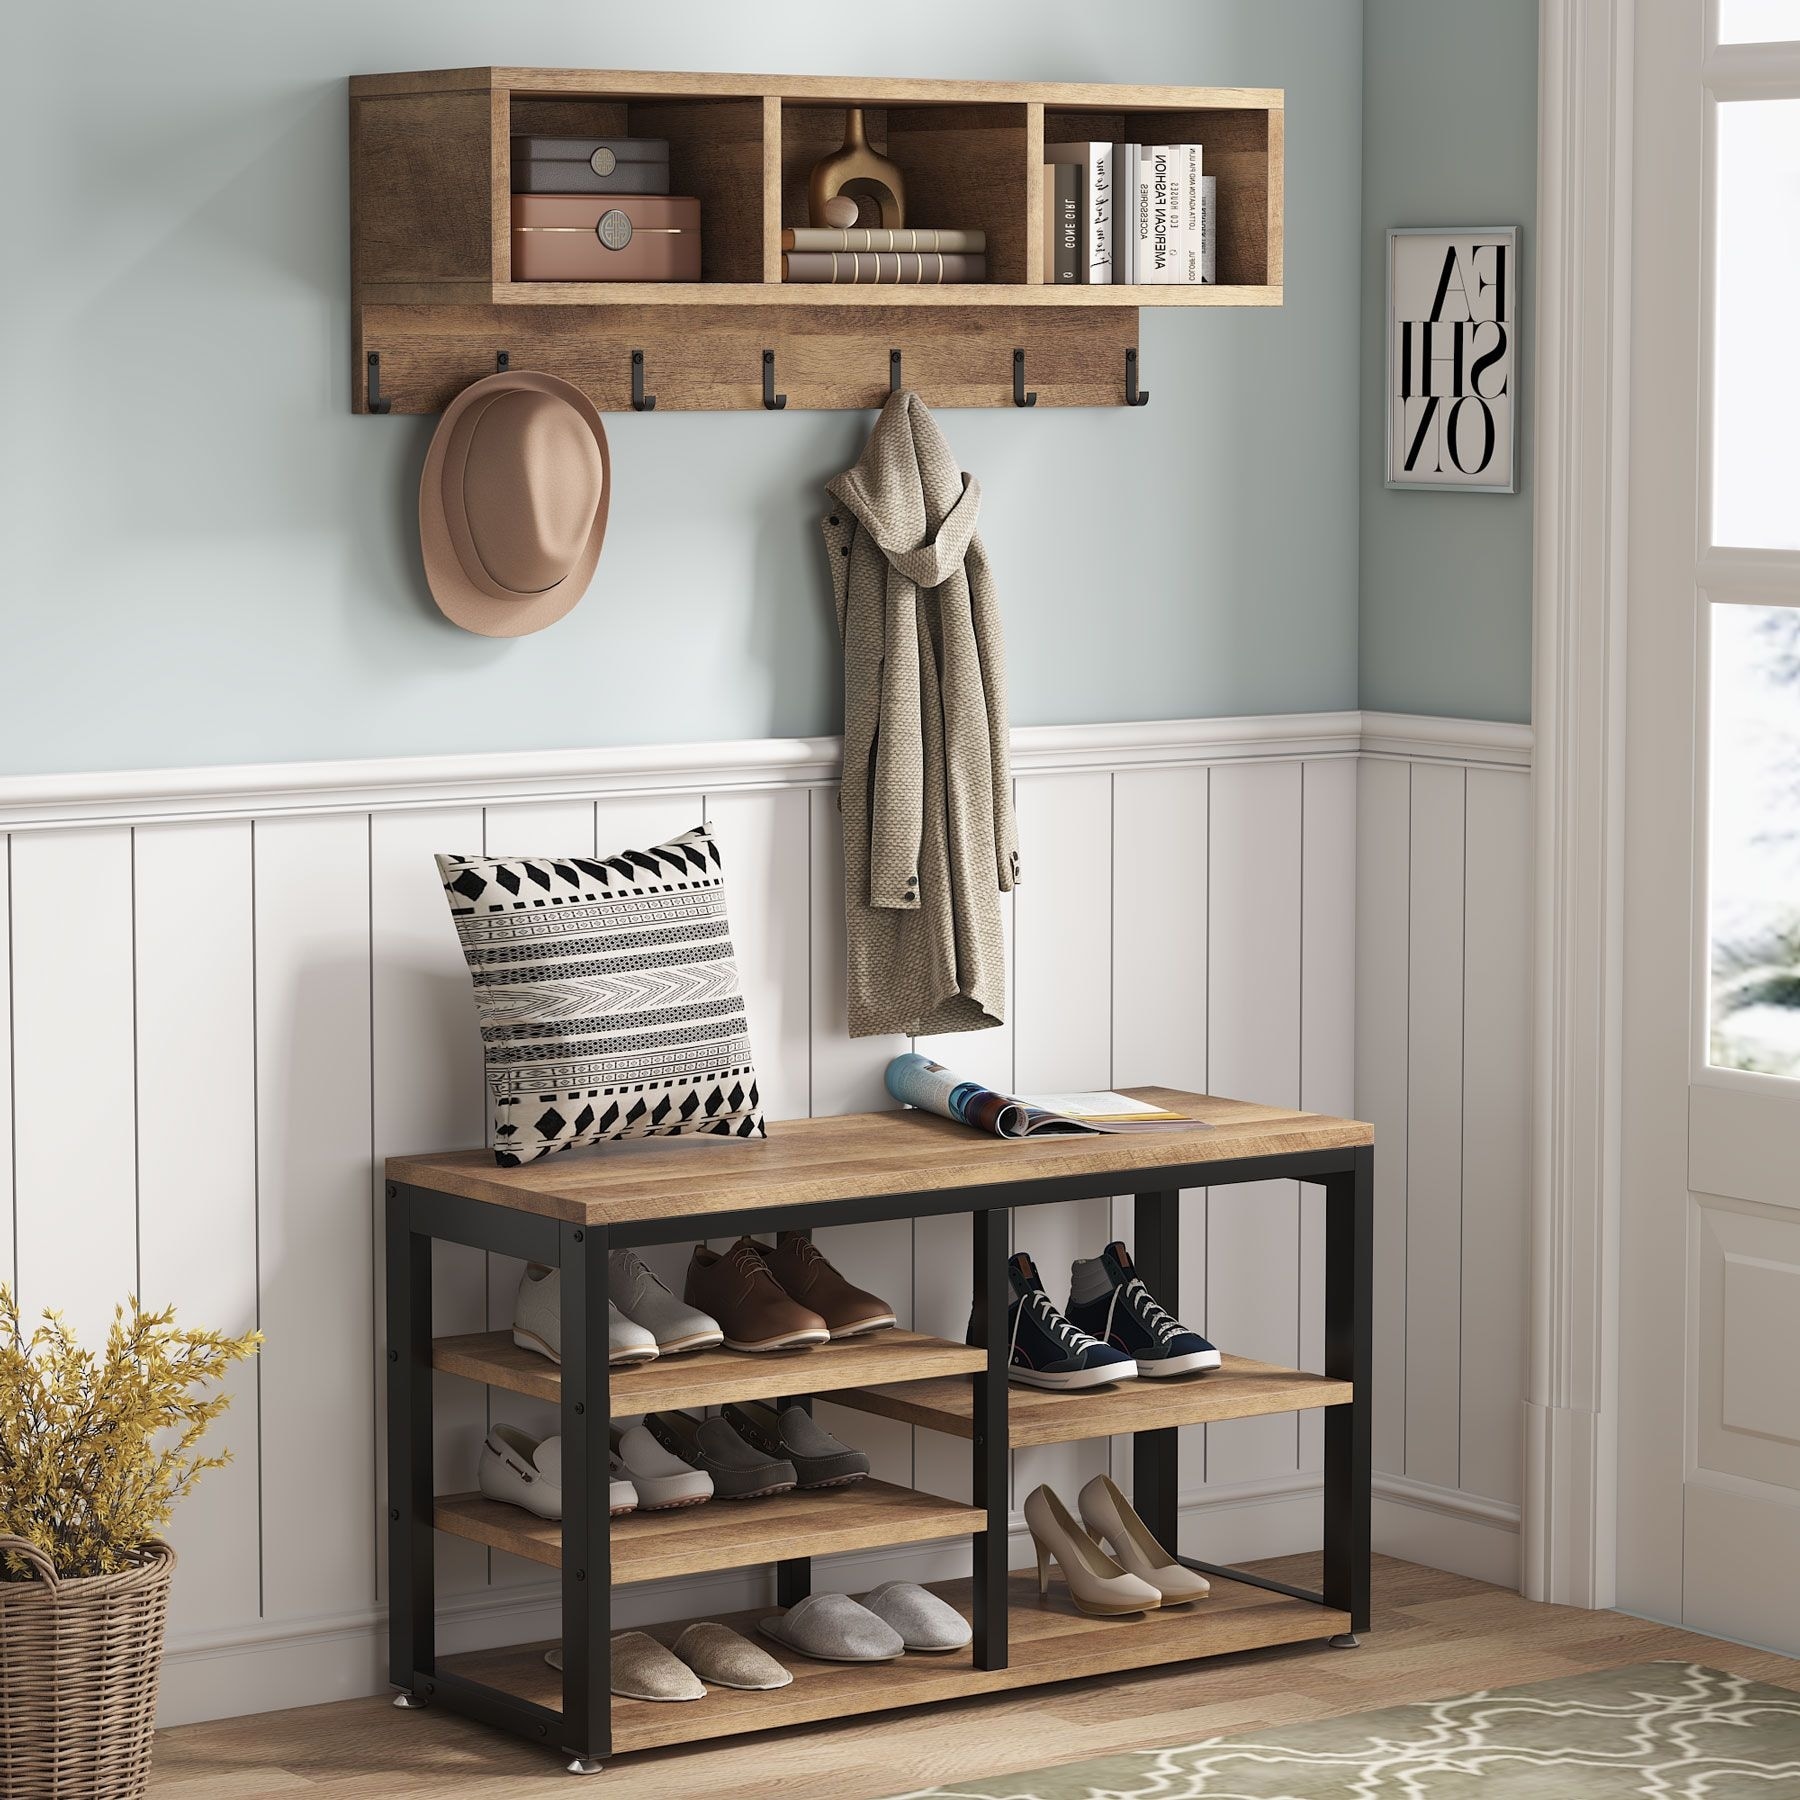 Entryway Hall Tree with Shoe Storage Bench and Coat Racks 4 Hooks - Bed  Bath & Beyond - 36689770